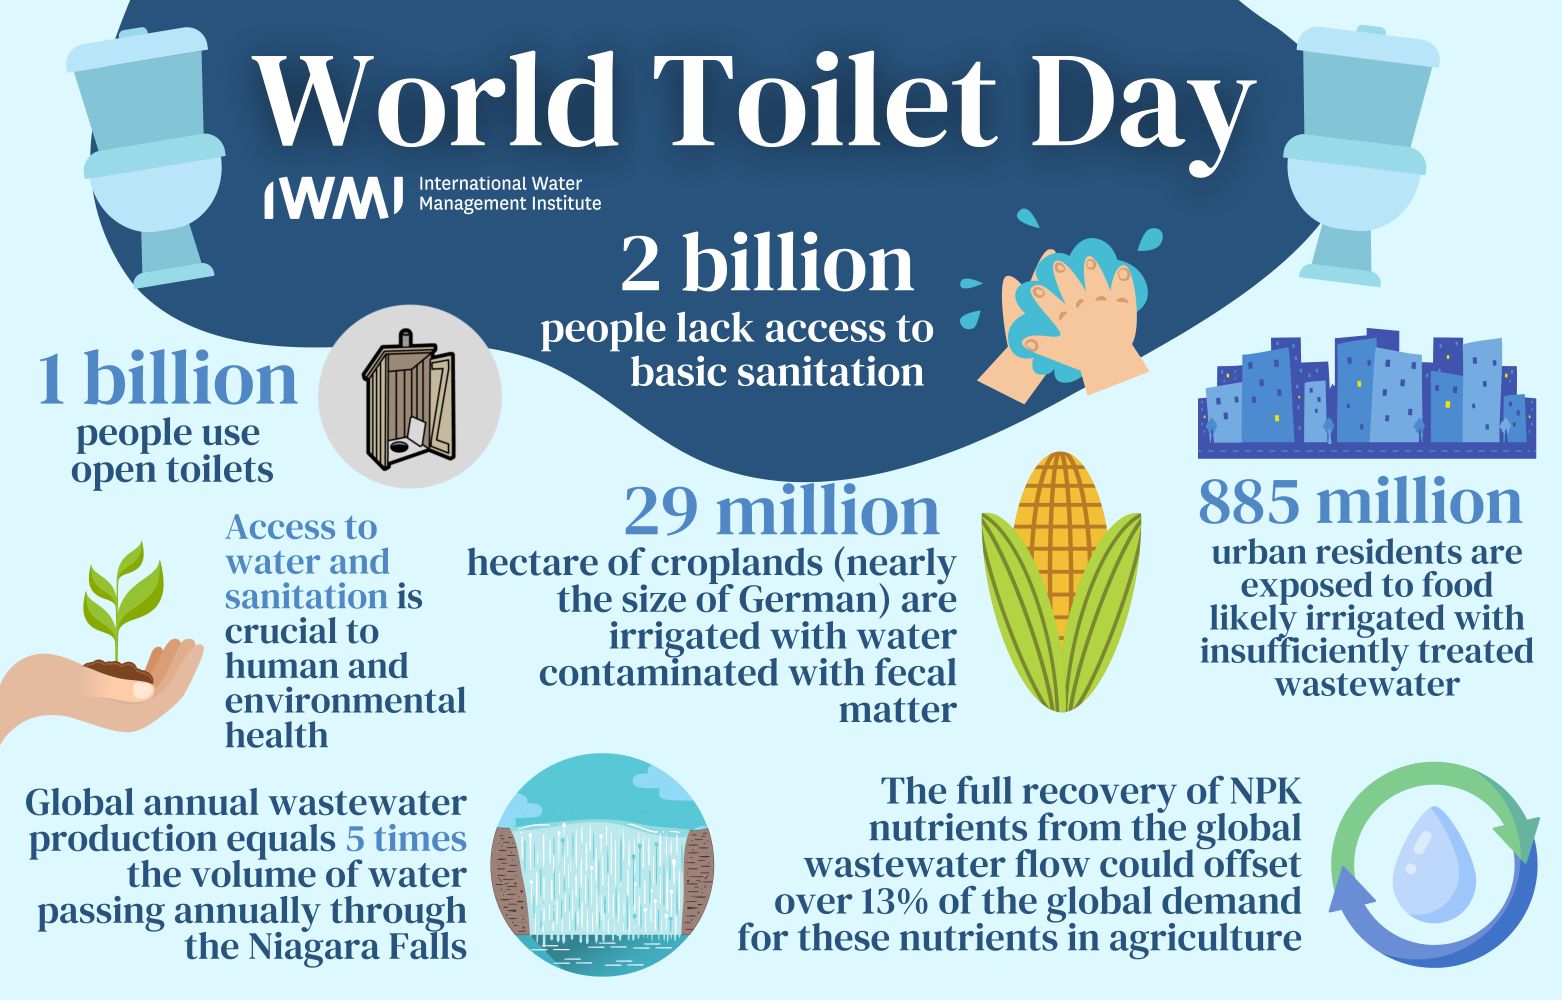 World Toilet Day 2021 infographic (click for larger view)